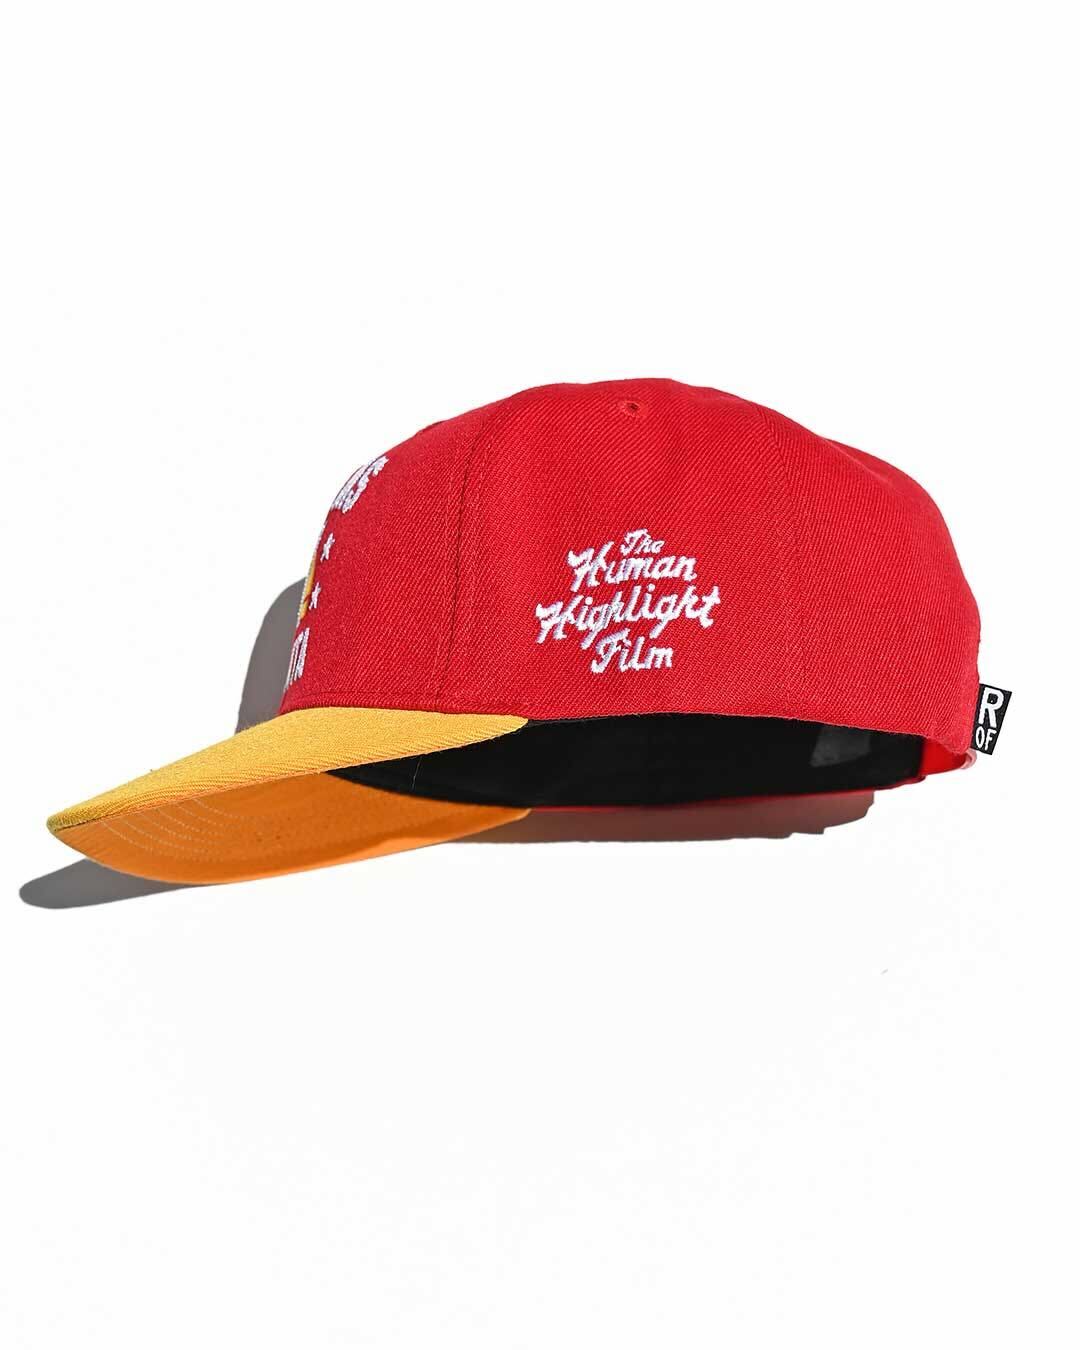 Dominique Wilkins #21 Snapback Hat - Roots of Fight Canada